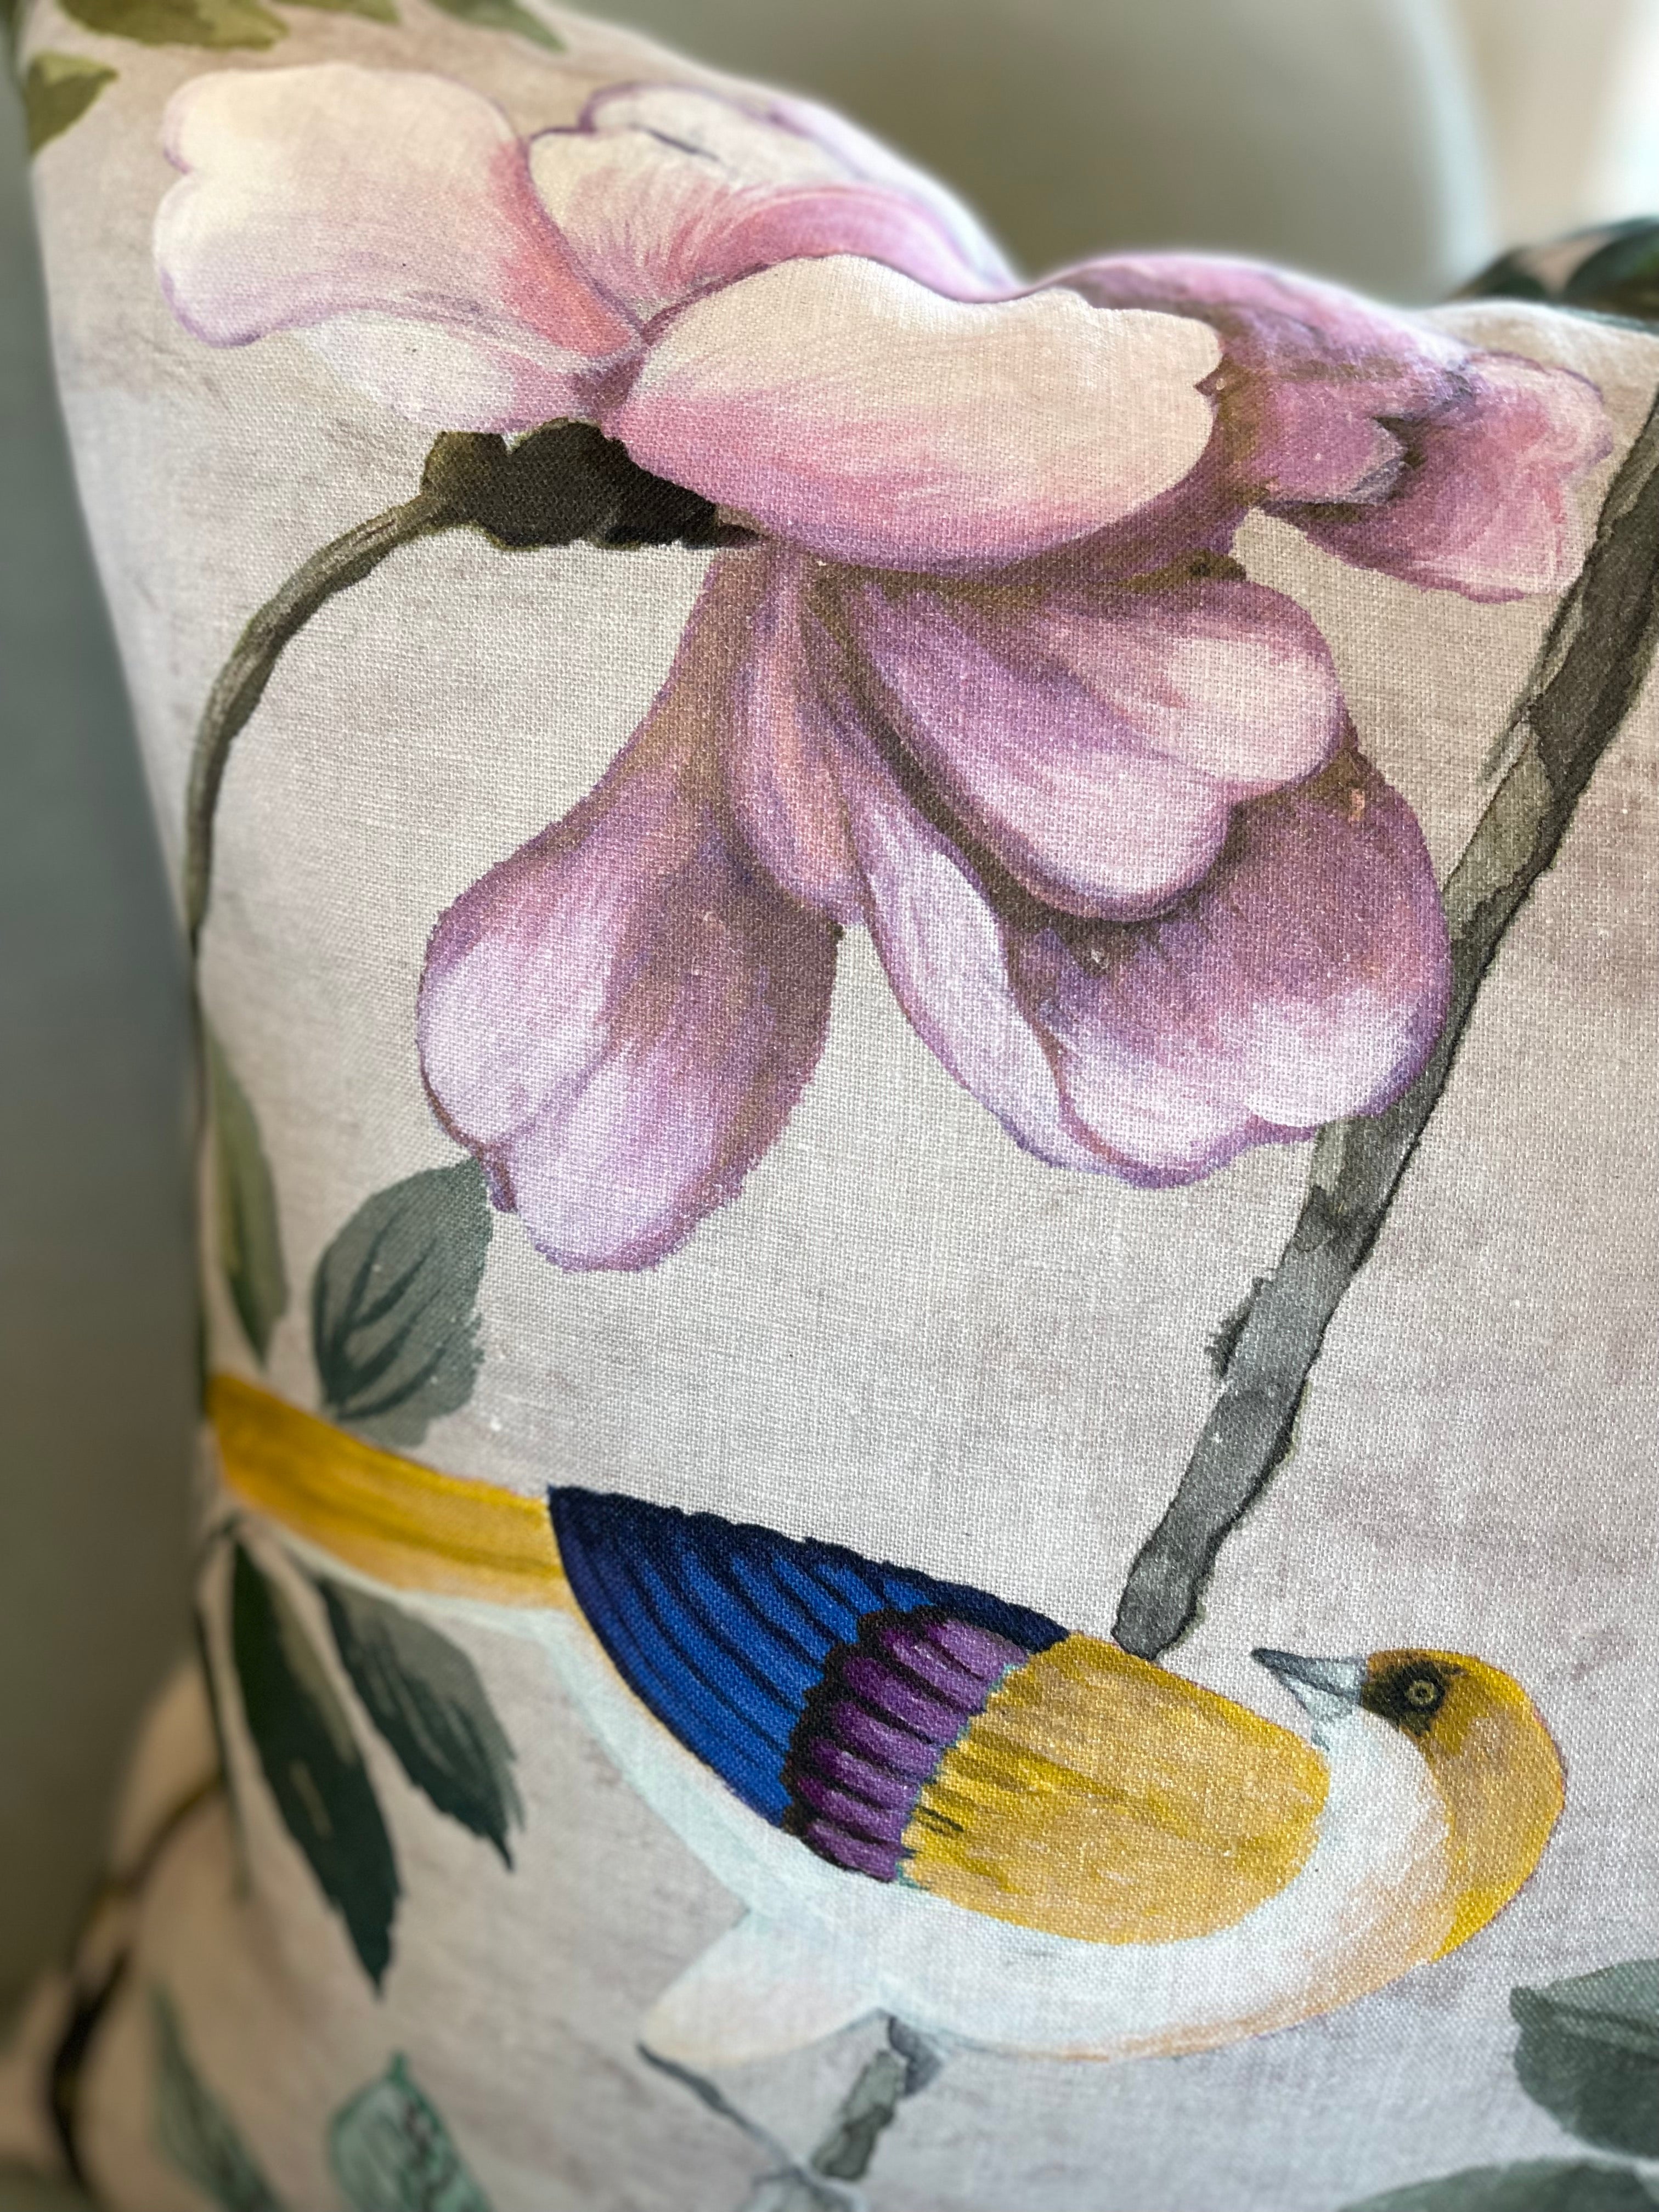 Floral Pillow in English Fabric